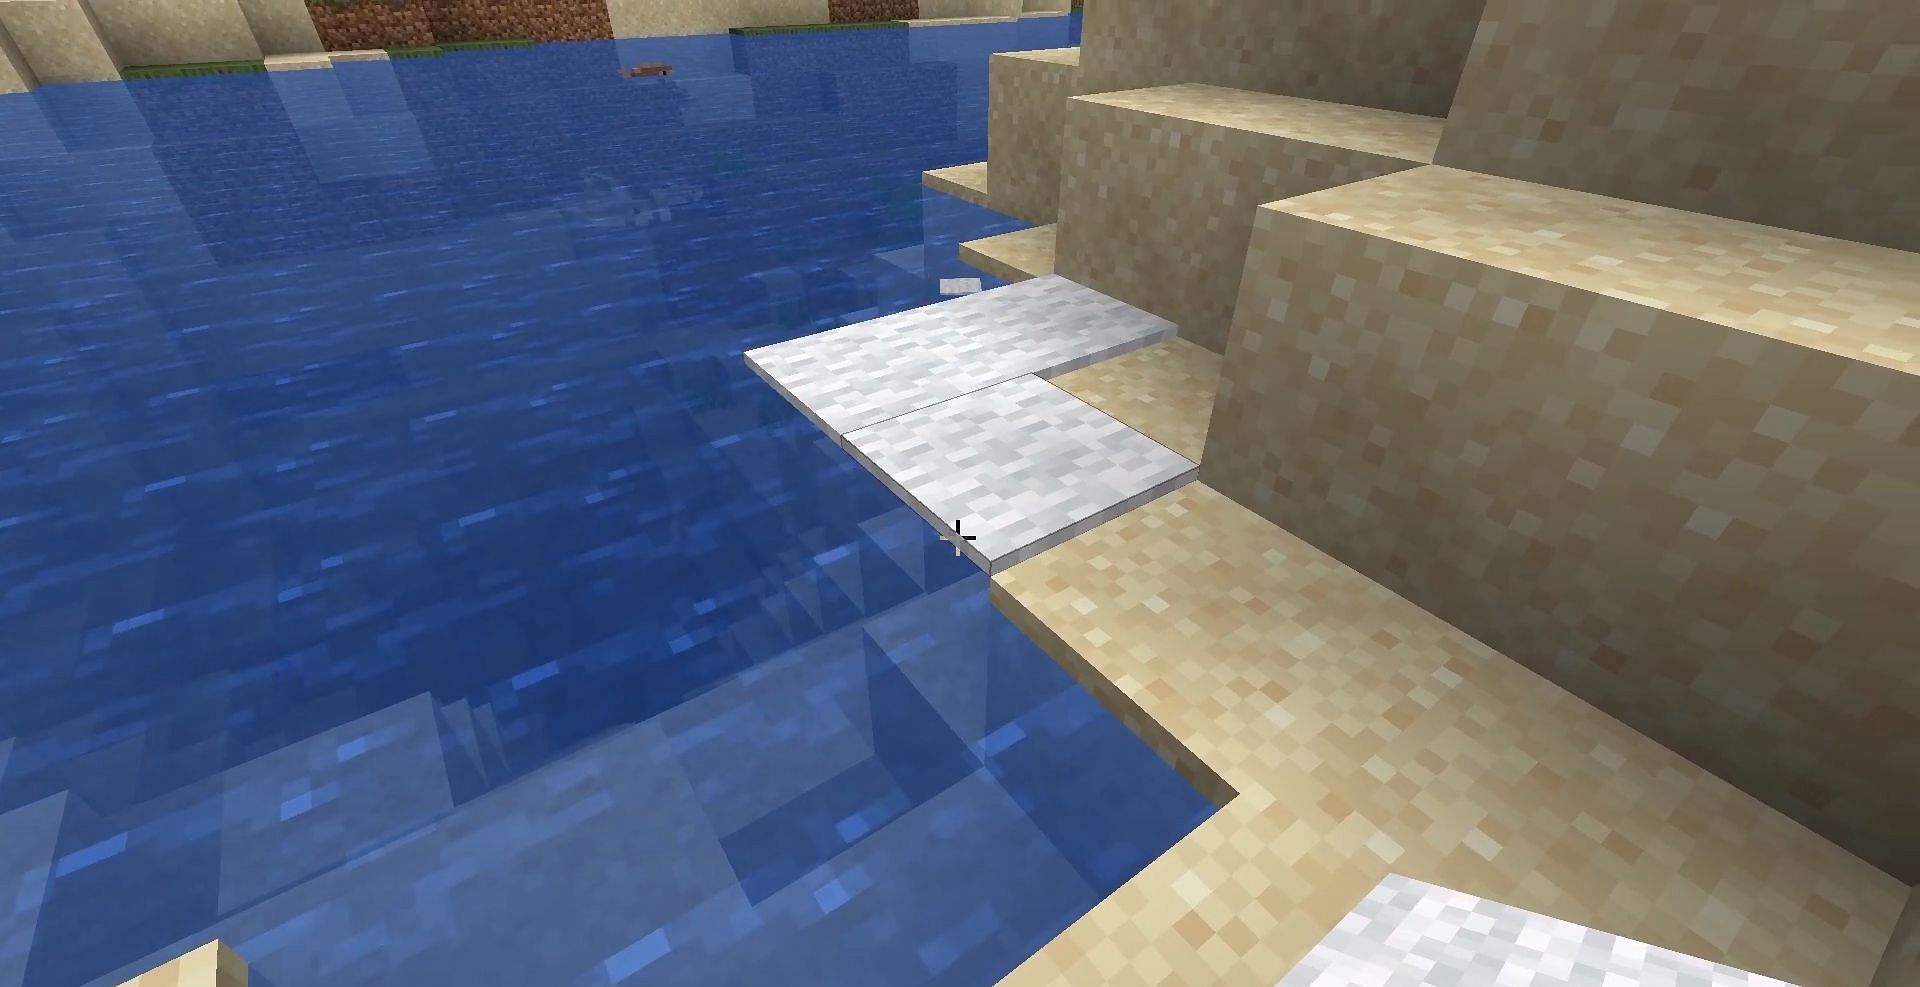 They can be placed on water as well (Image via RajCraft/YouTube)